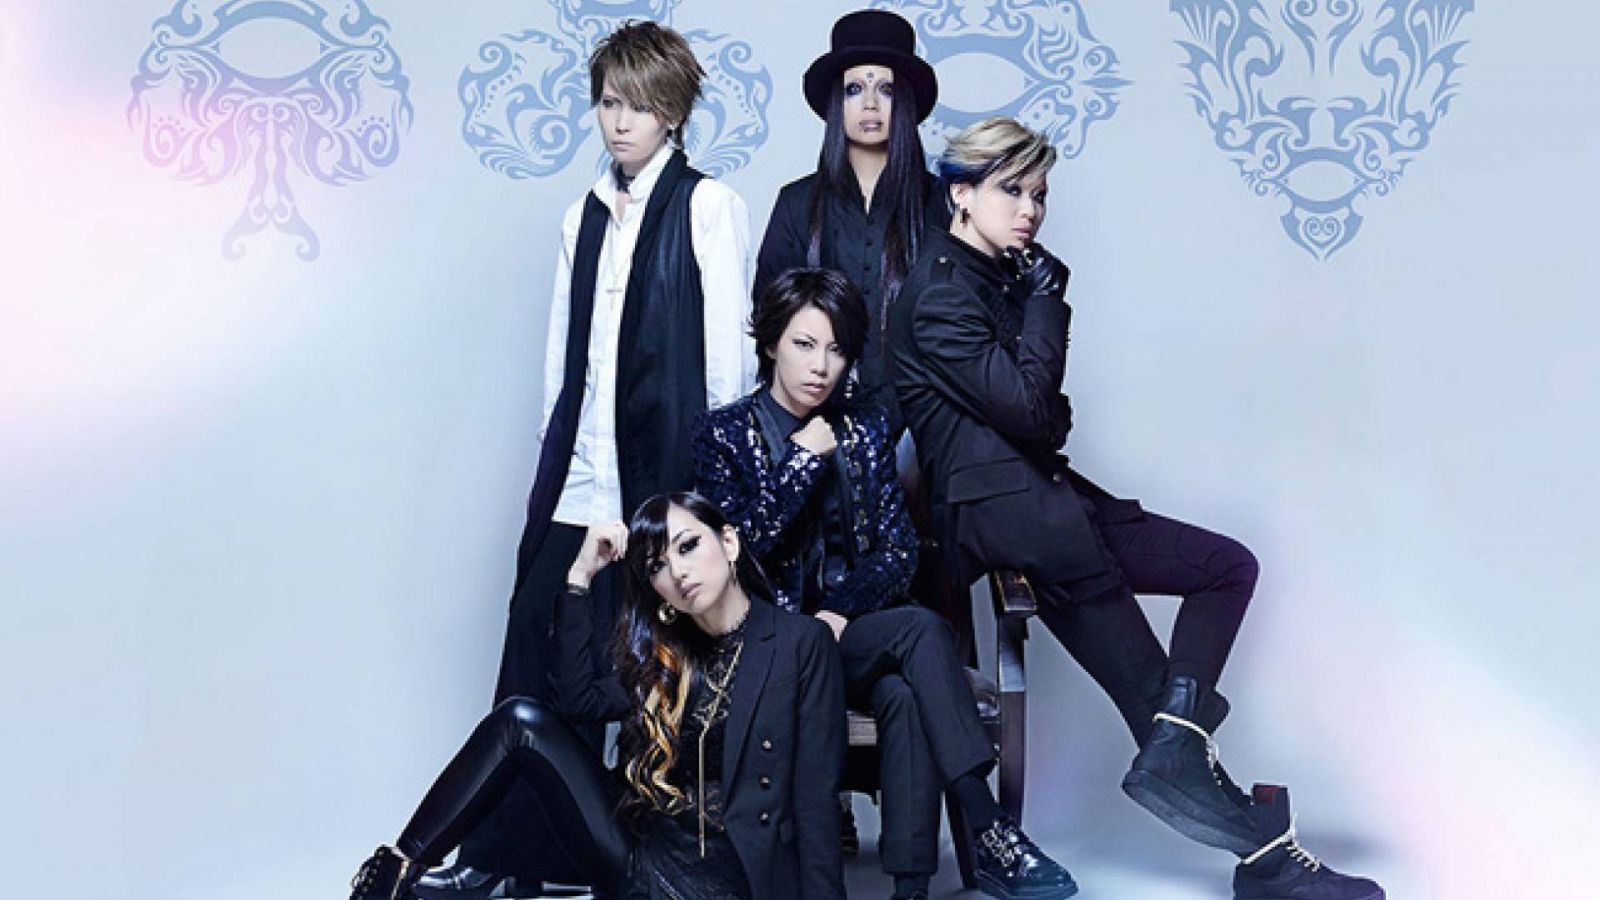 Entrevista con exist†trace © Monster's Inc. All rights reserved.